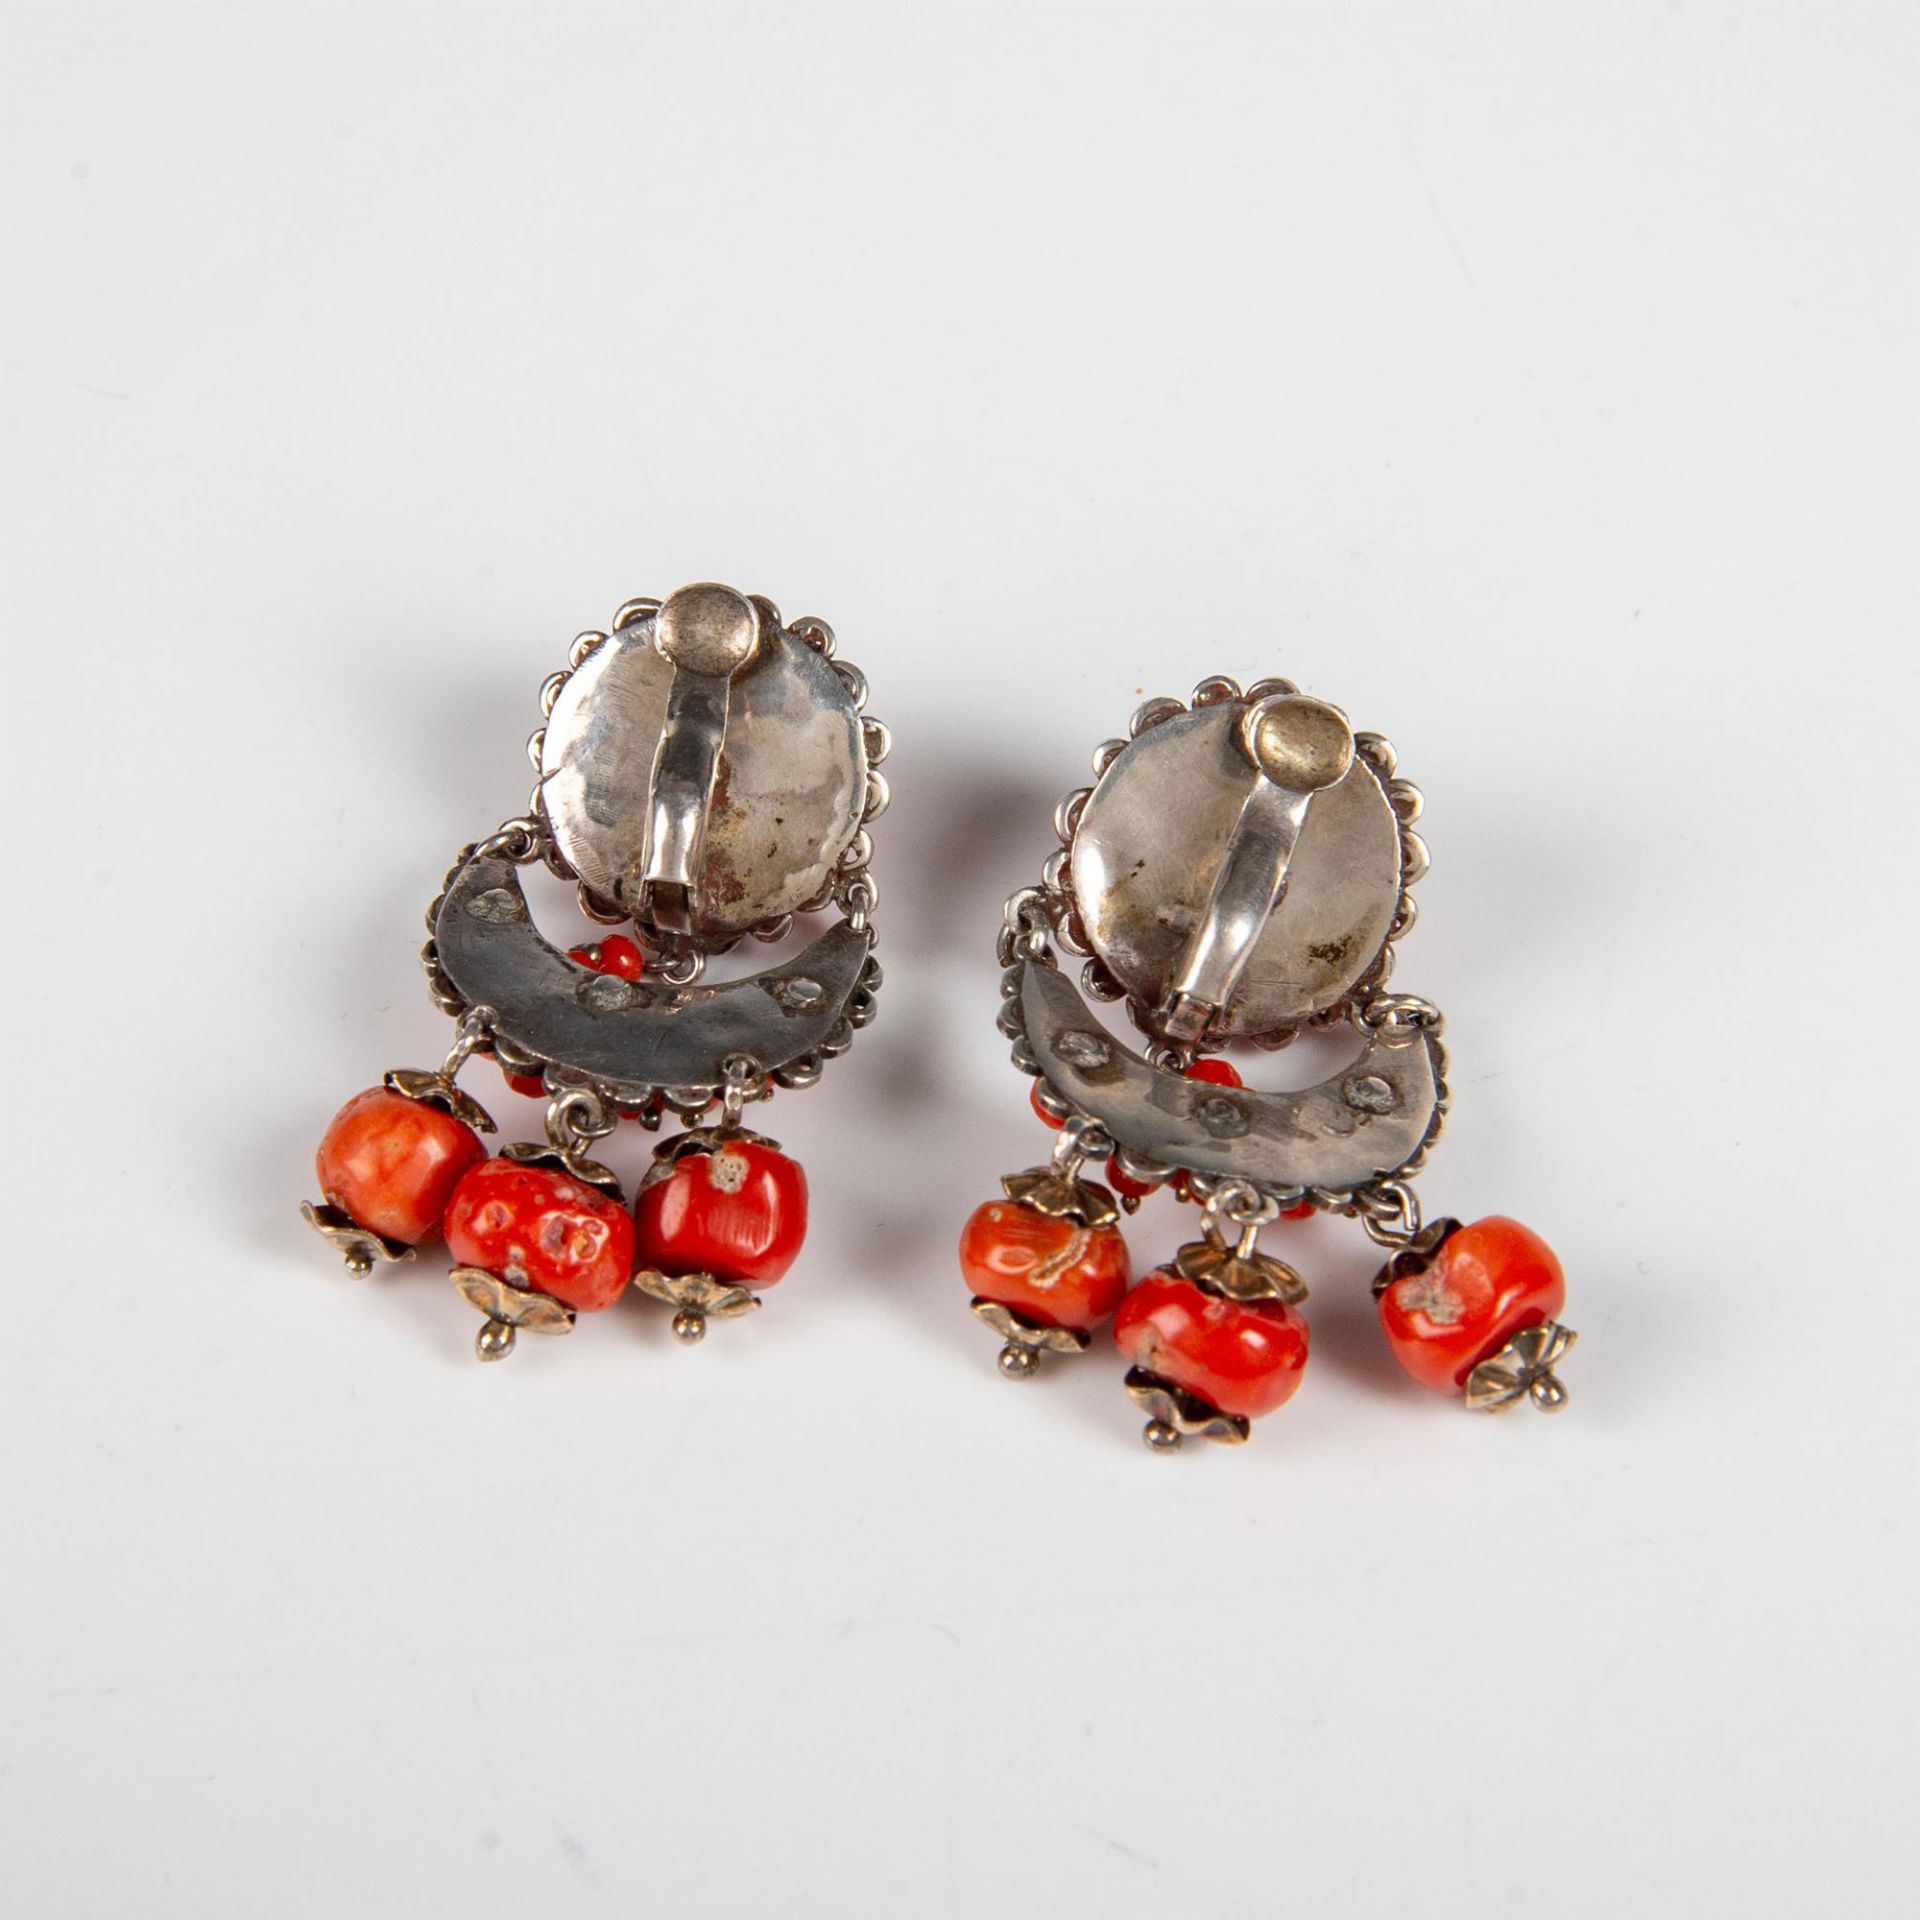 Pair of Silver and Chinese Coral Earrings - Image 5 of 6